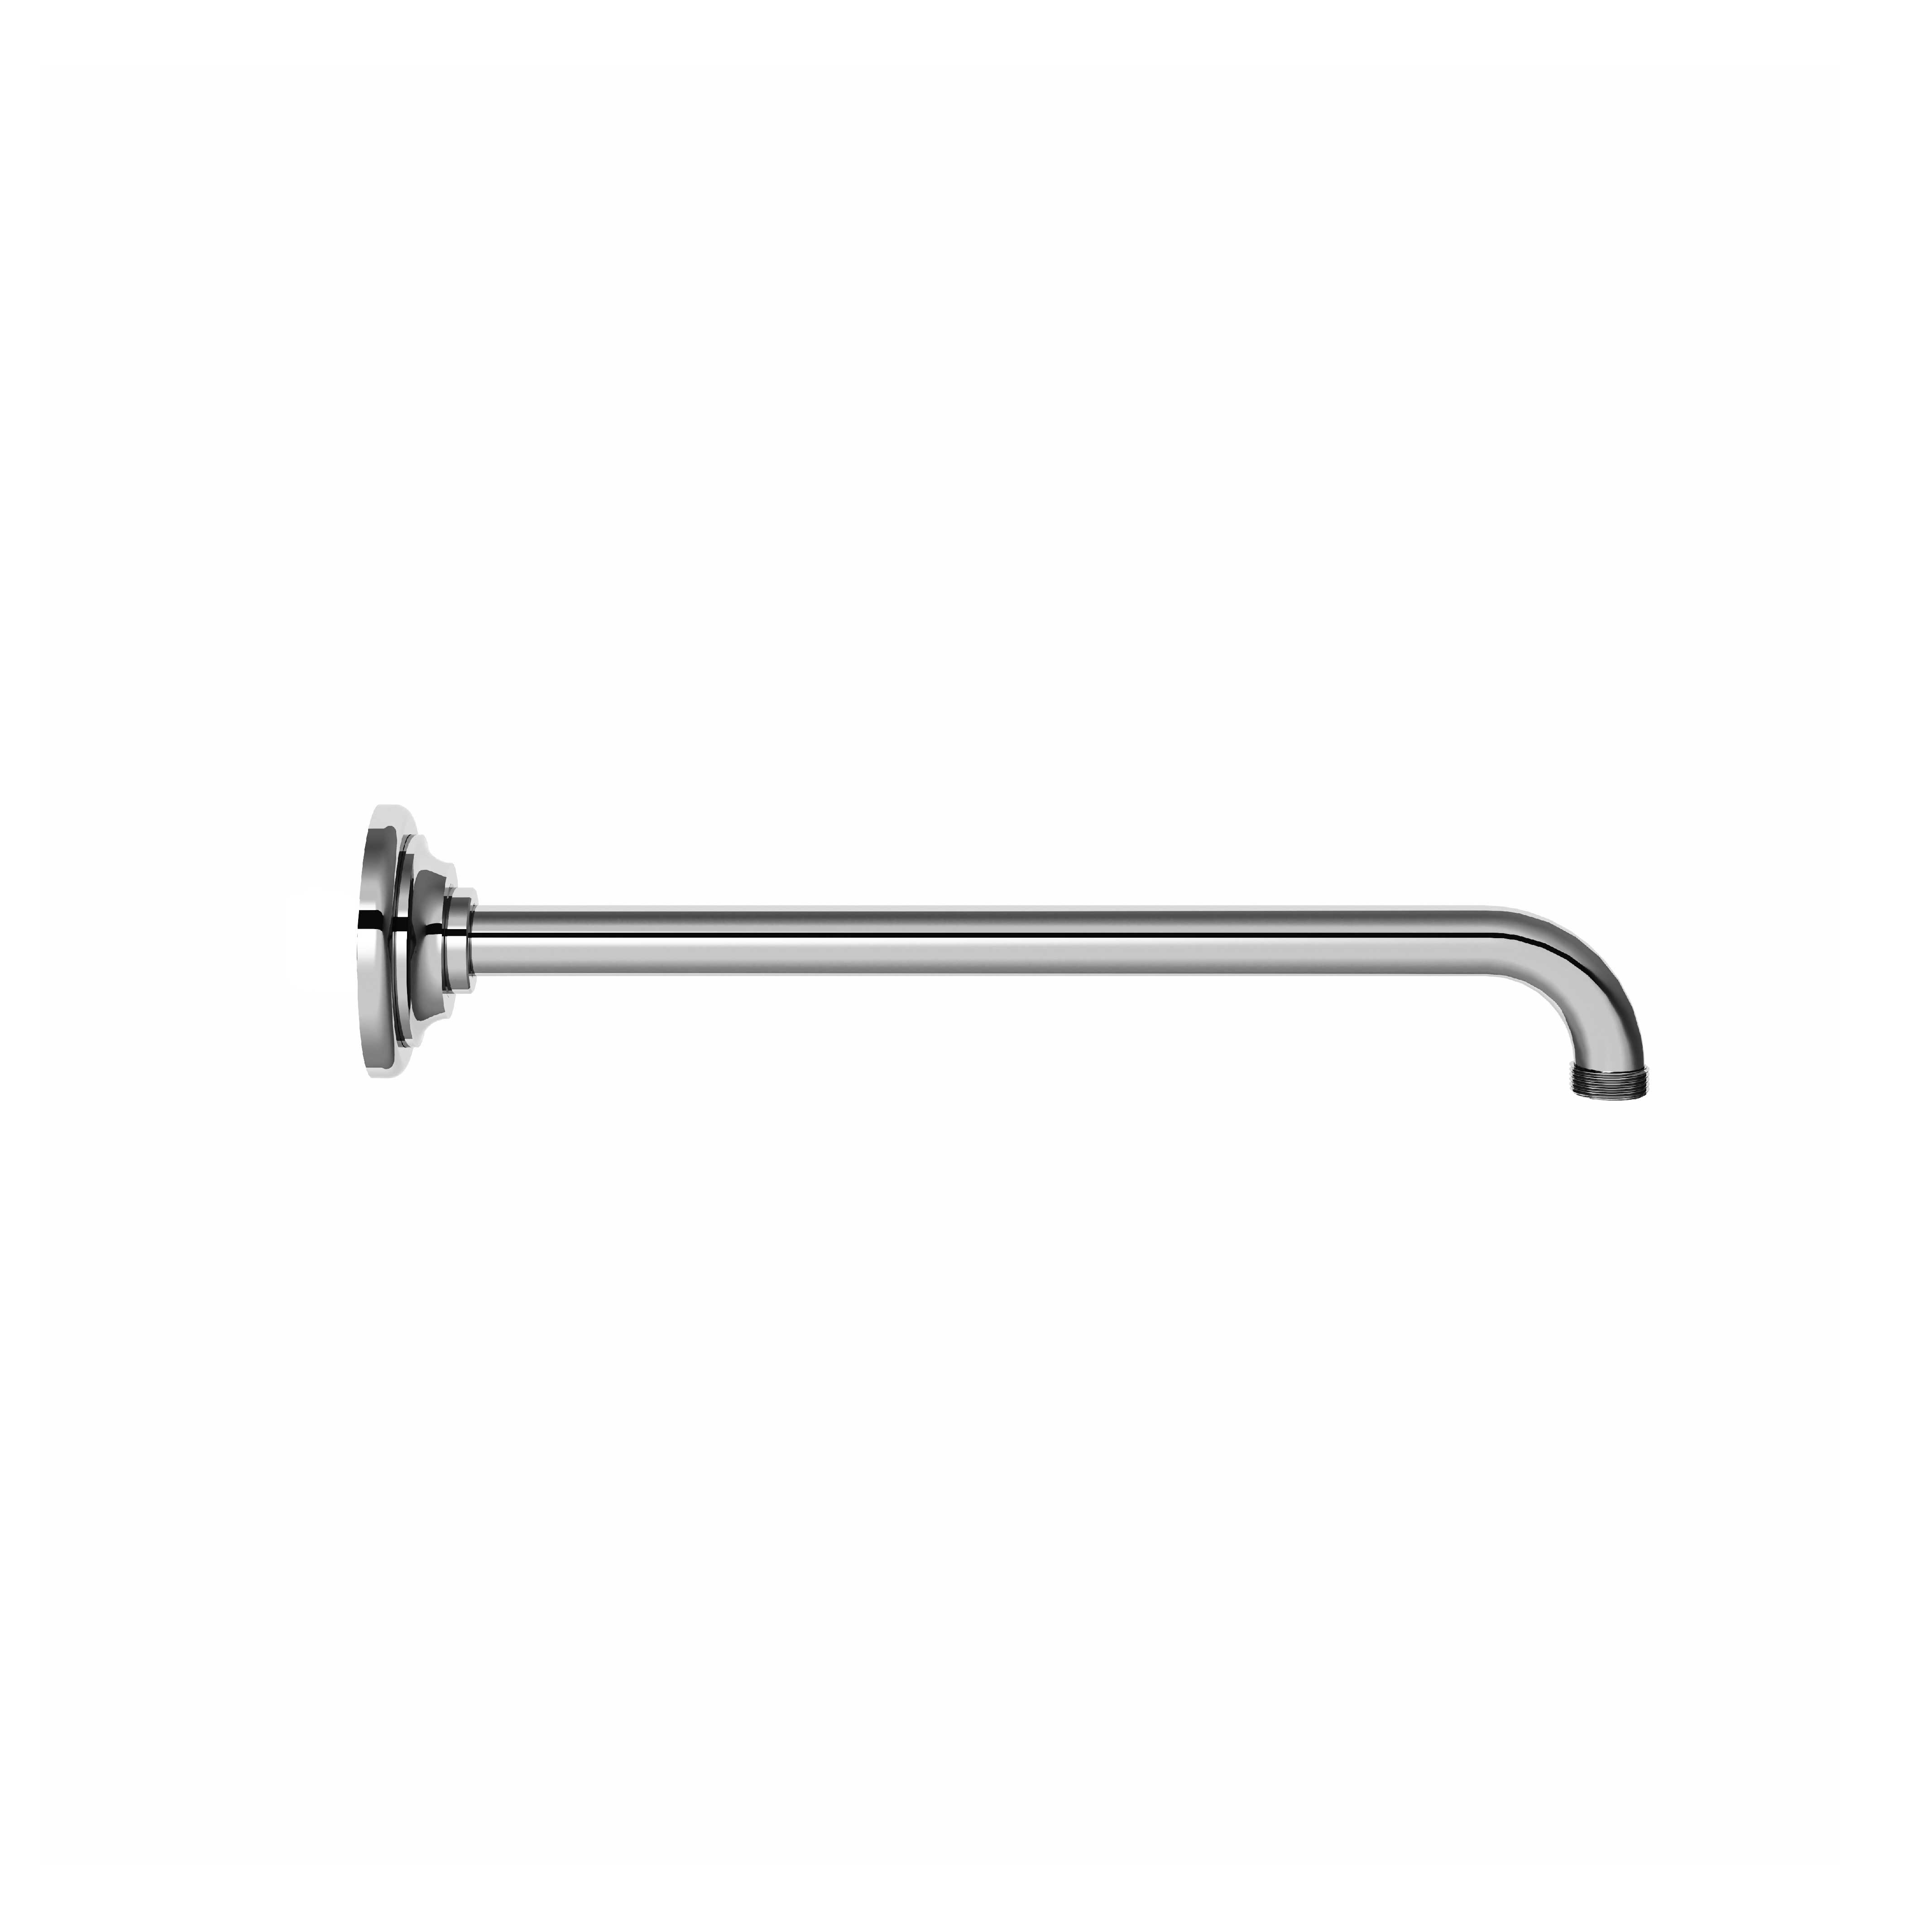 M01-2W301 Wall mounted shower arm 300mm